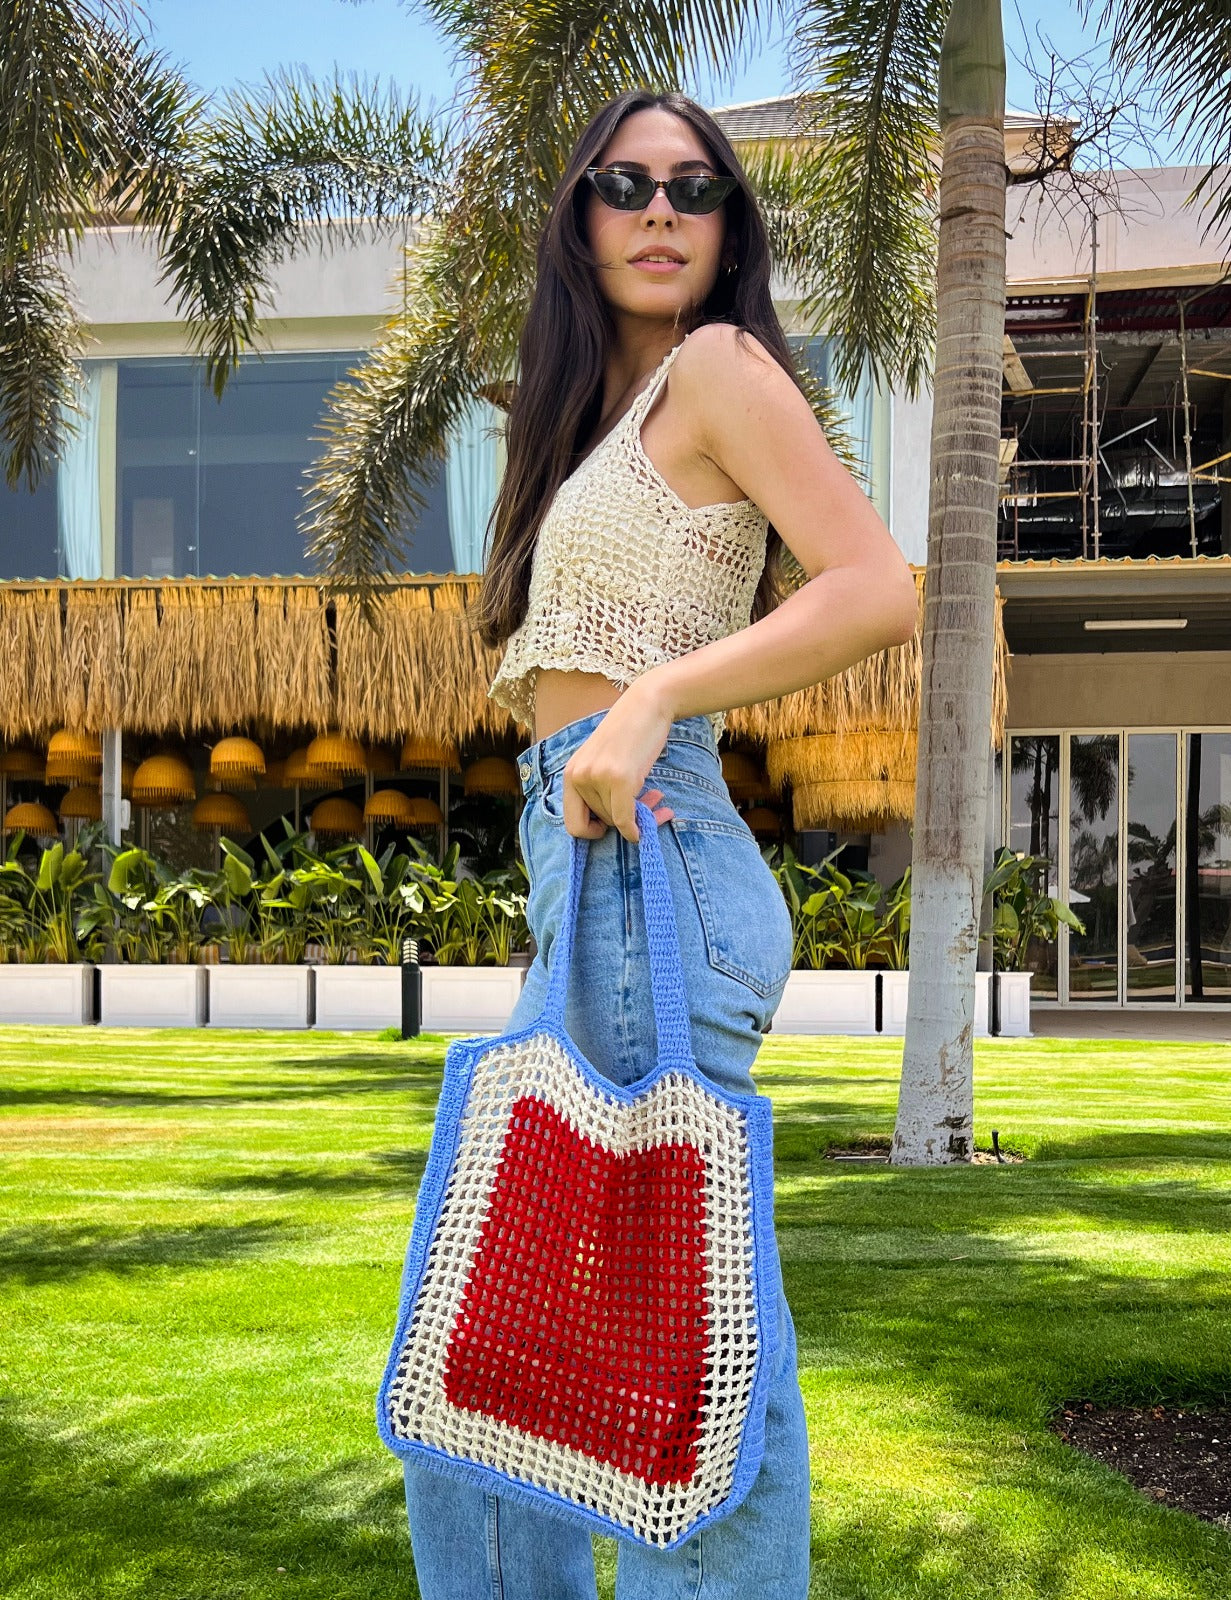 The Knit Tote In Red And Baby Blue